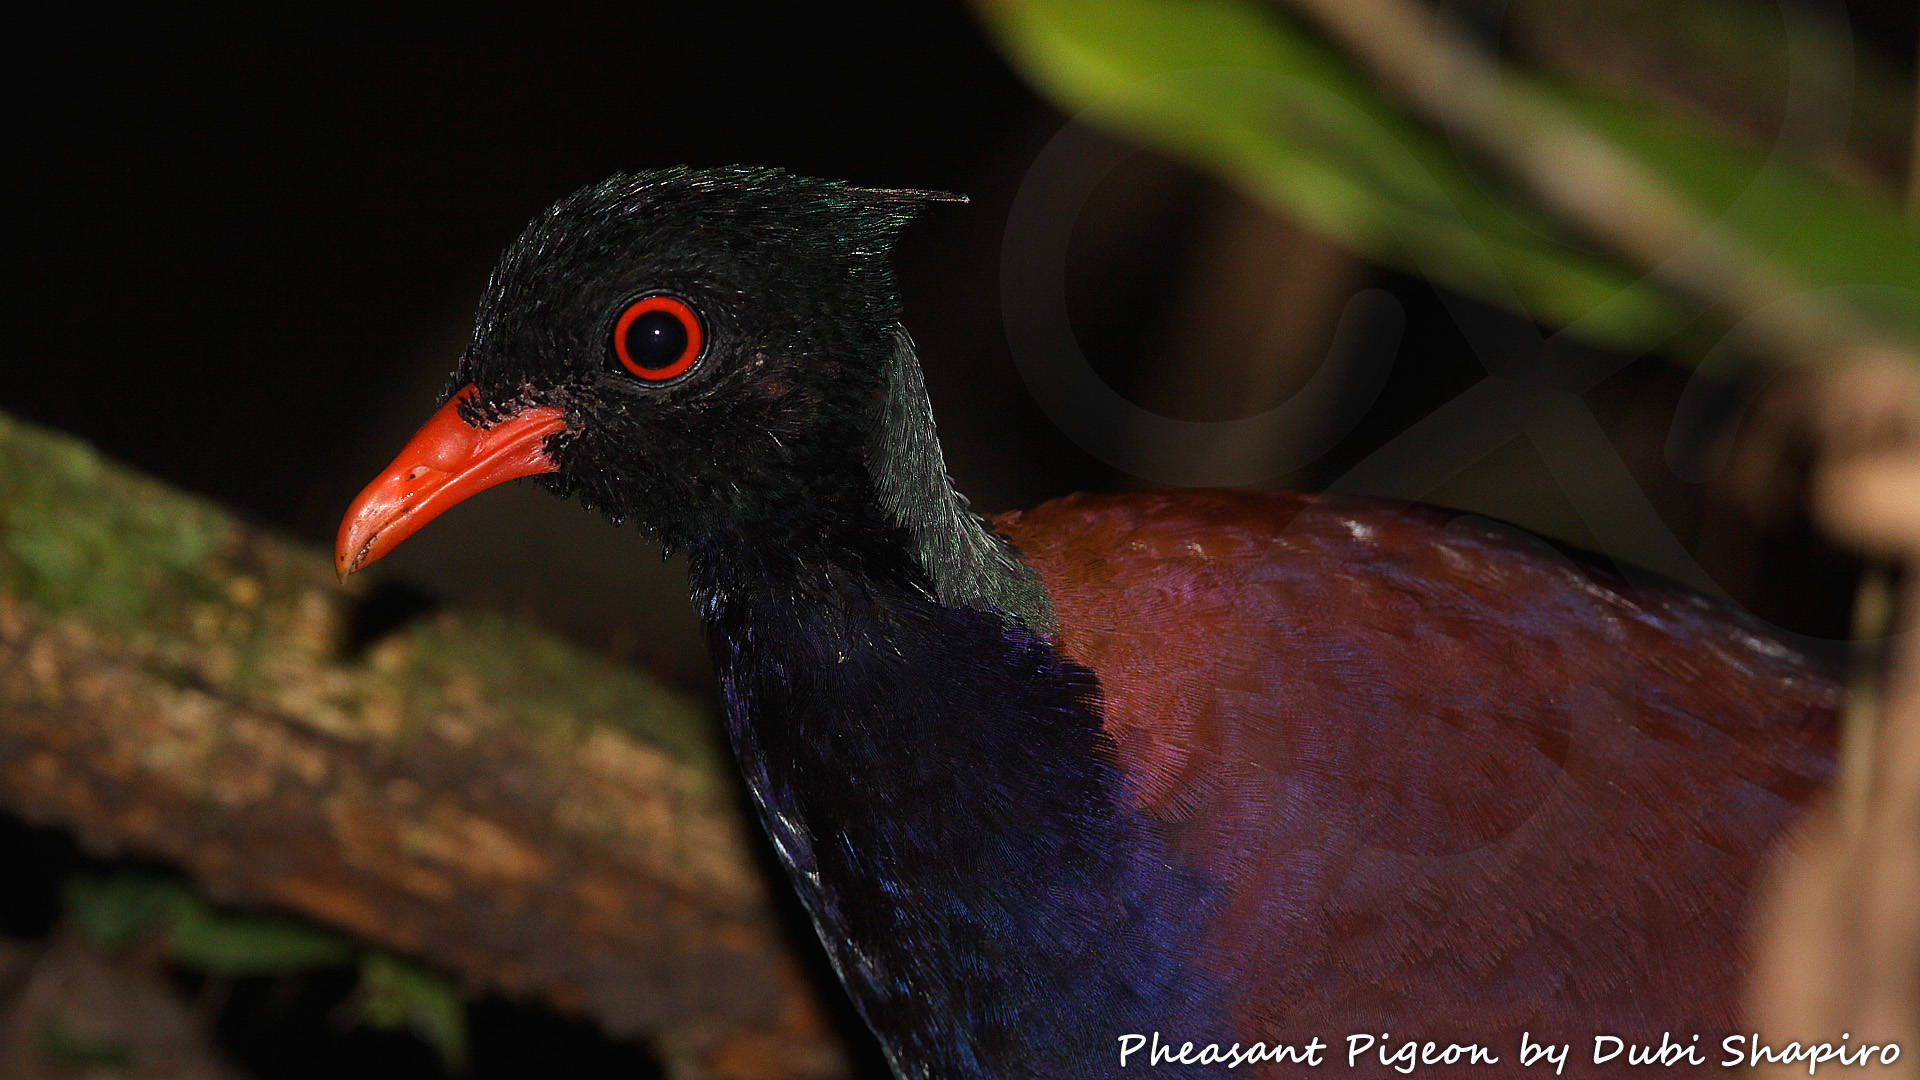 New Guinea forest bird communities differ markedly from elsewhere in featuring an unusually high proportion of ground-dwellers like this strange Pheasant Pigeon Otidiphaps nobilis which belongs in its own genus and is among 290 bird species in West Papua that are endemic to the New Guinea or Papuan avifaunal region. Copyright © Dubi Shapiro